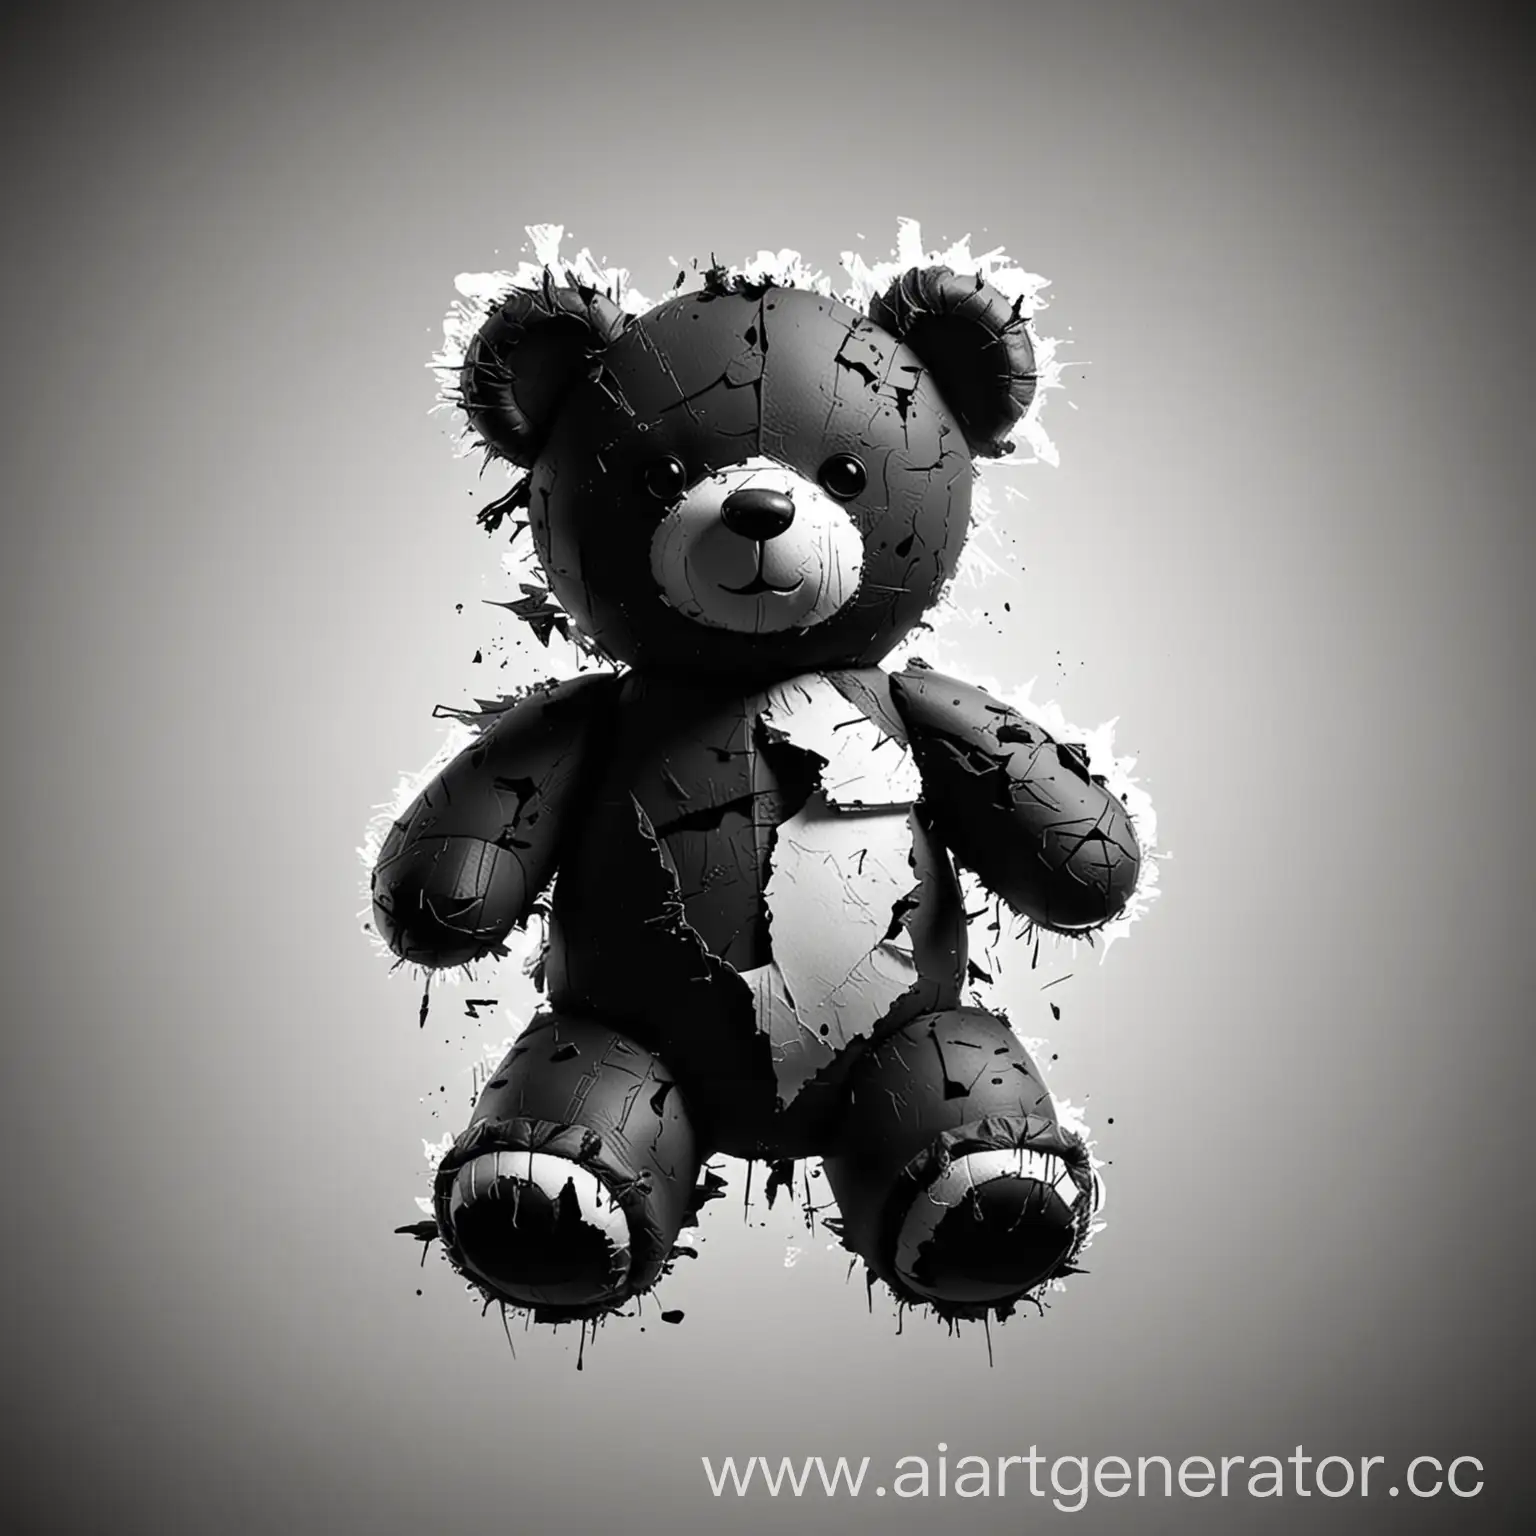 the silhouette of a torn teddy bear, black and wite, with ripped parts
